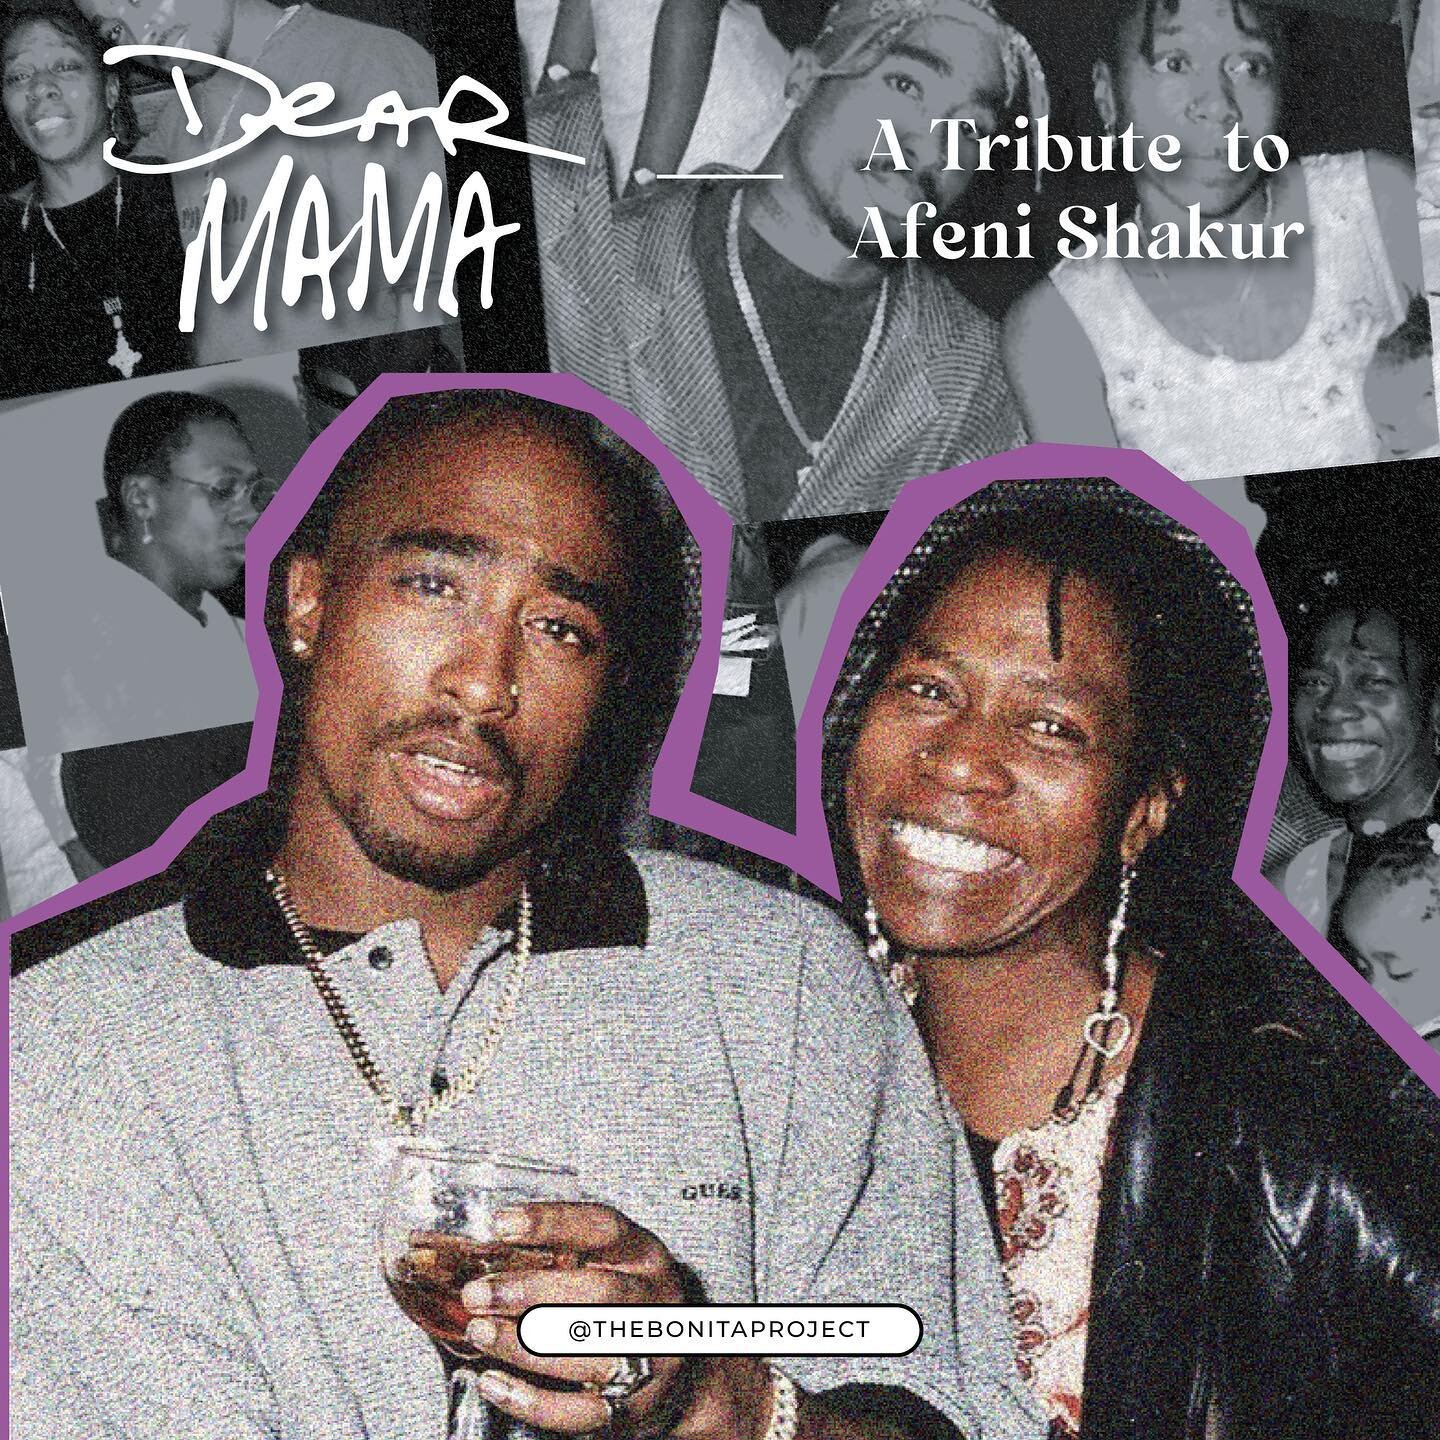 Inspired by the hit series &lsquo;Dear Mama&rsquo; (which made history as the most watched first episode) - we wanted to celebrate Mother&rsquo;s Day with a tribute to Afeni Shakur - the remarkable mother of Tupac Shakur. 💖✨

Through her unwavering 